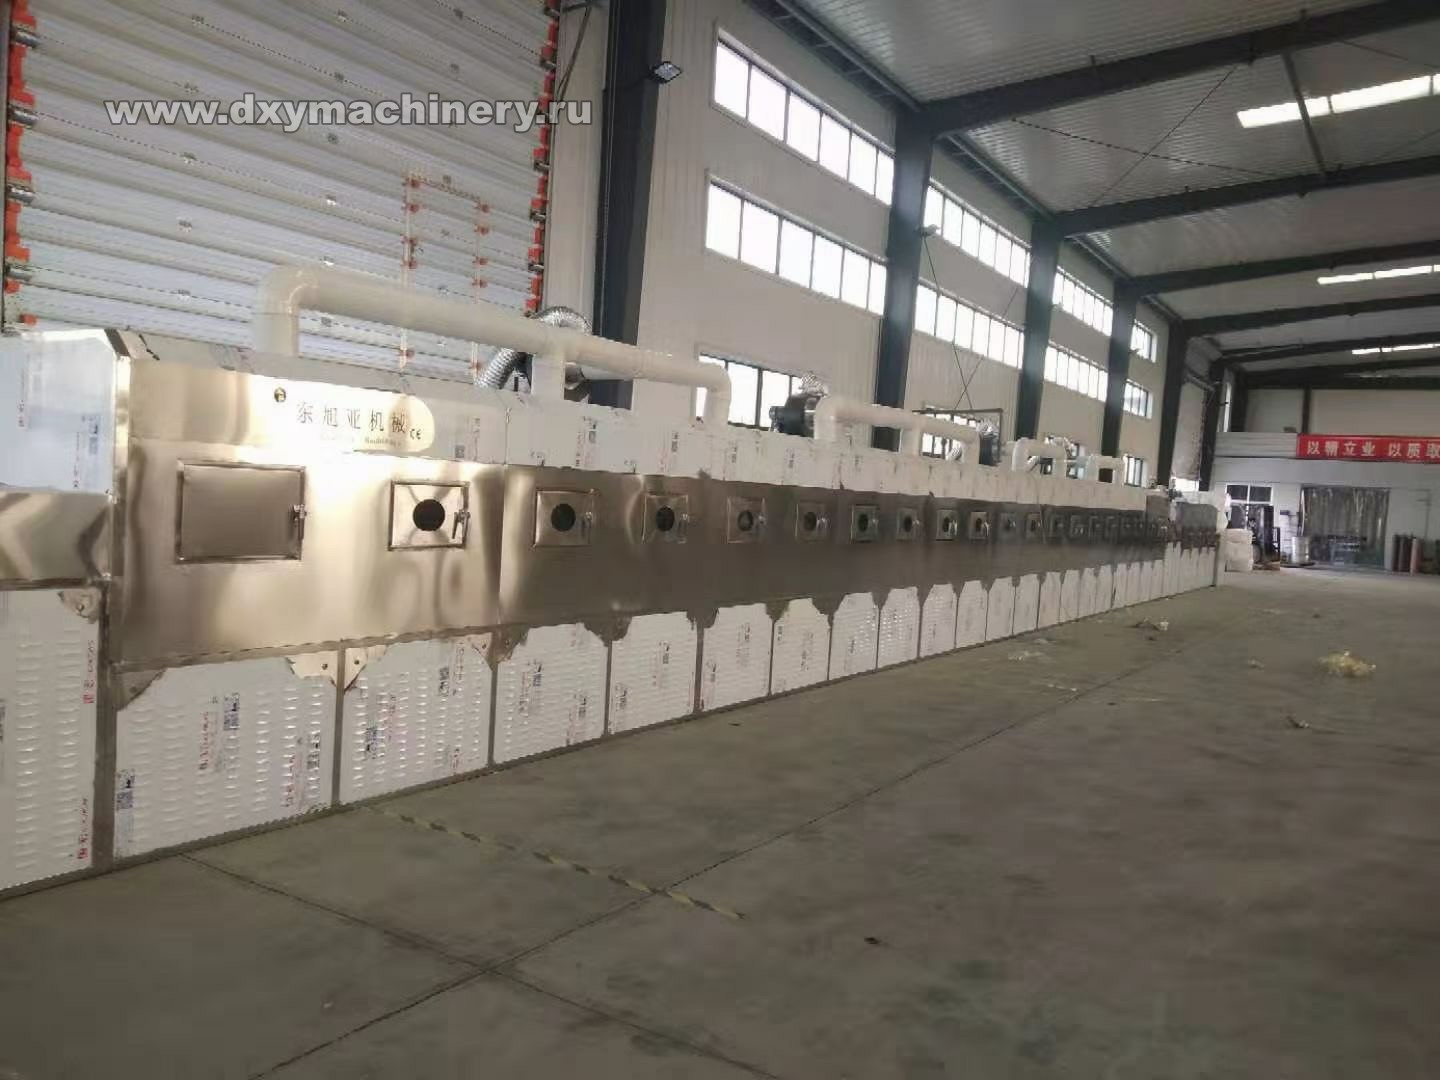 Supply of industrial microwave equipment for drying and sterilization